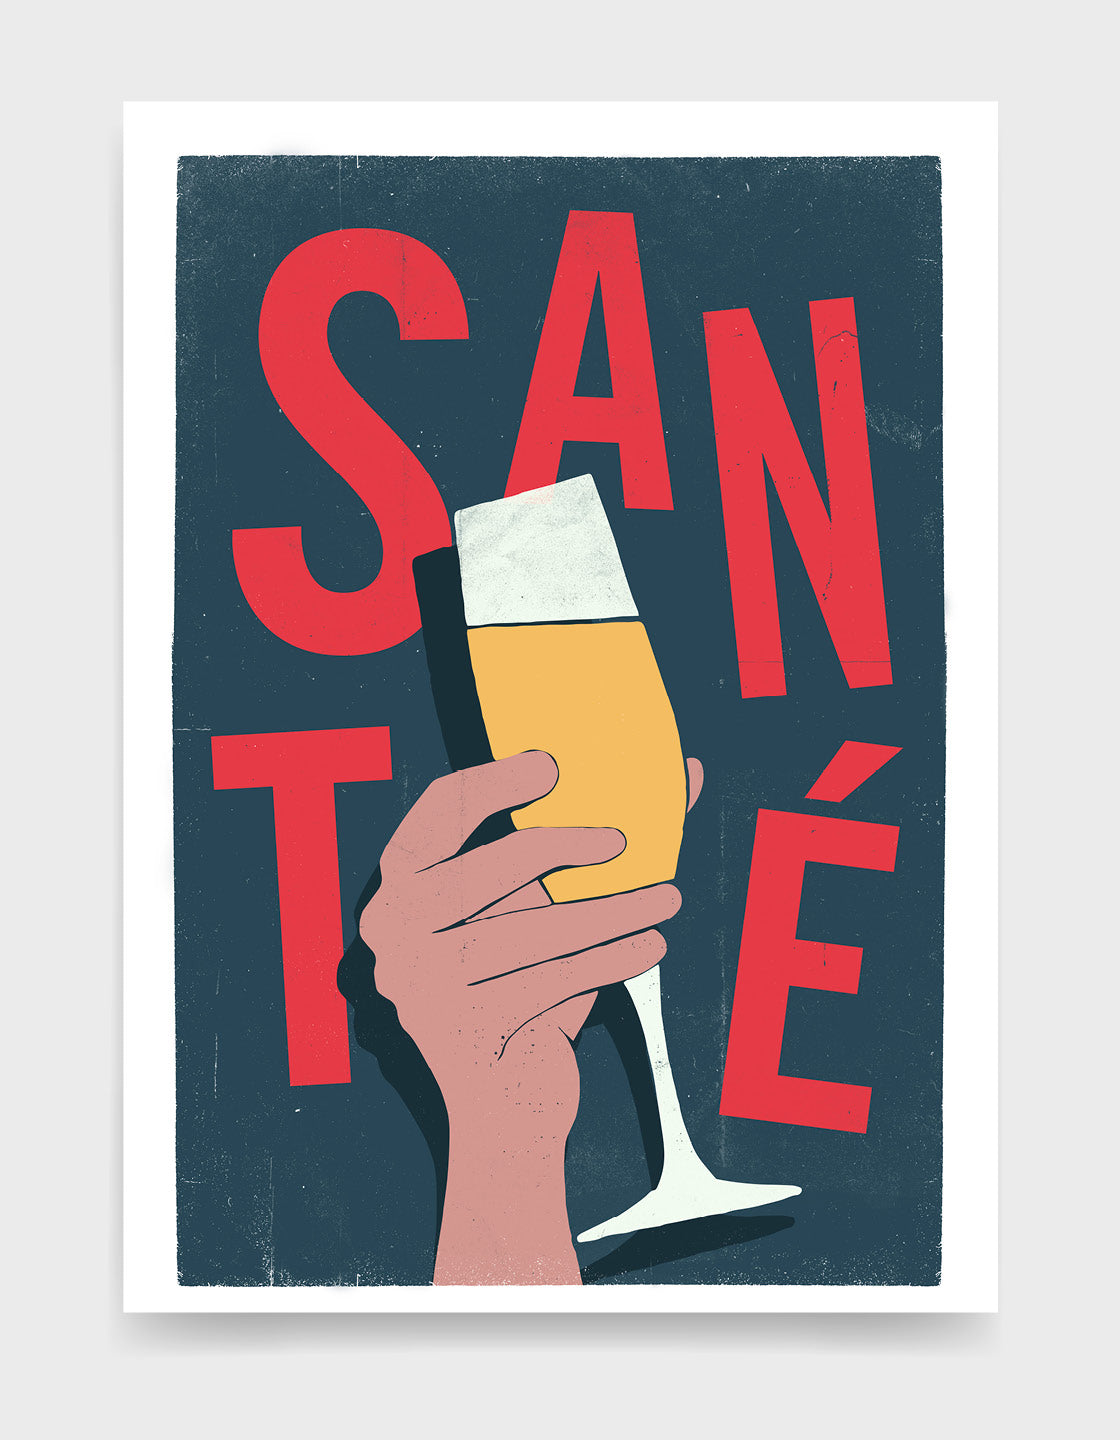 sante typography print with hand holding glass of fizz. text in red against a dark grey background